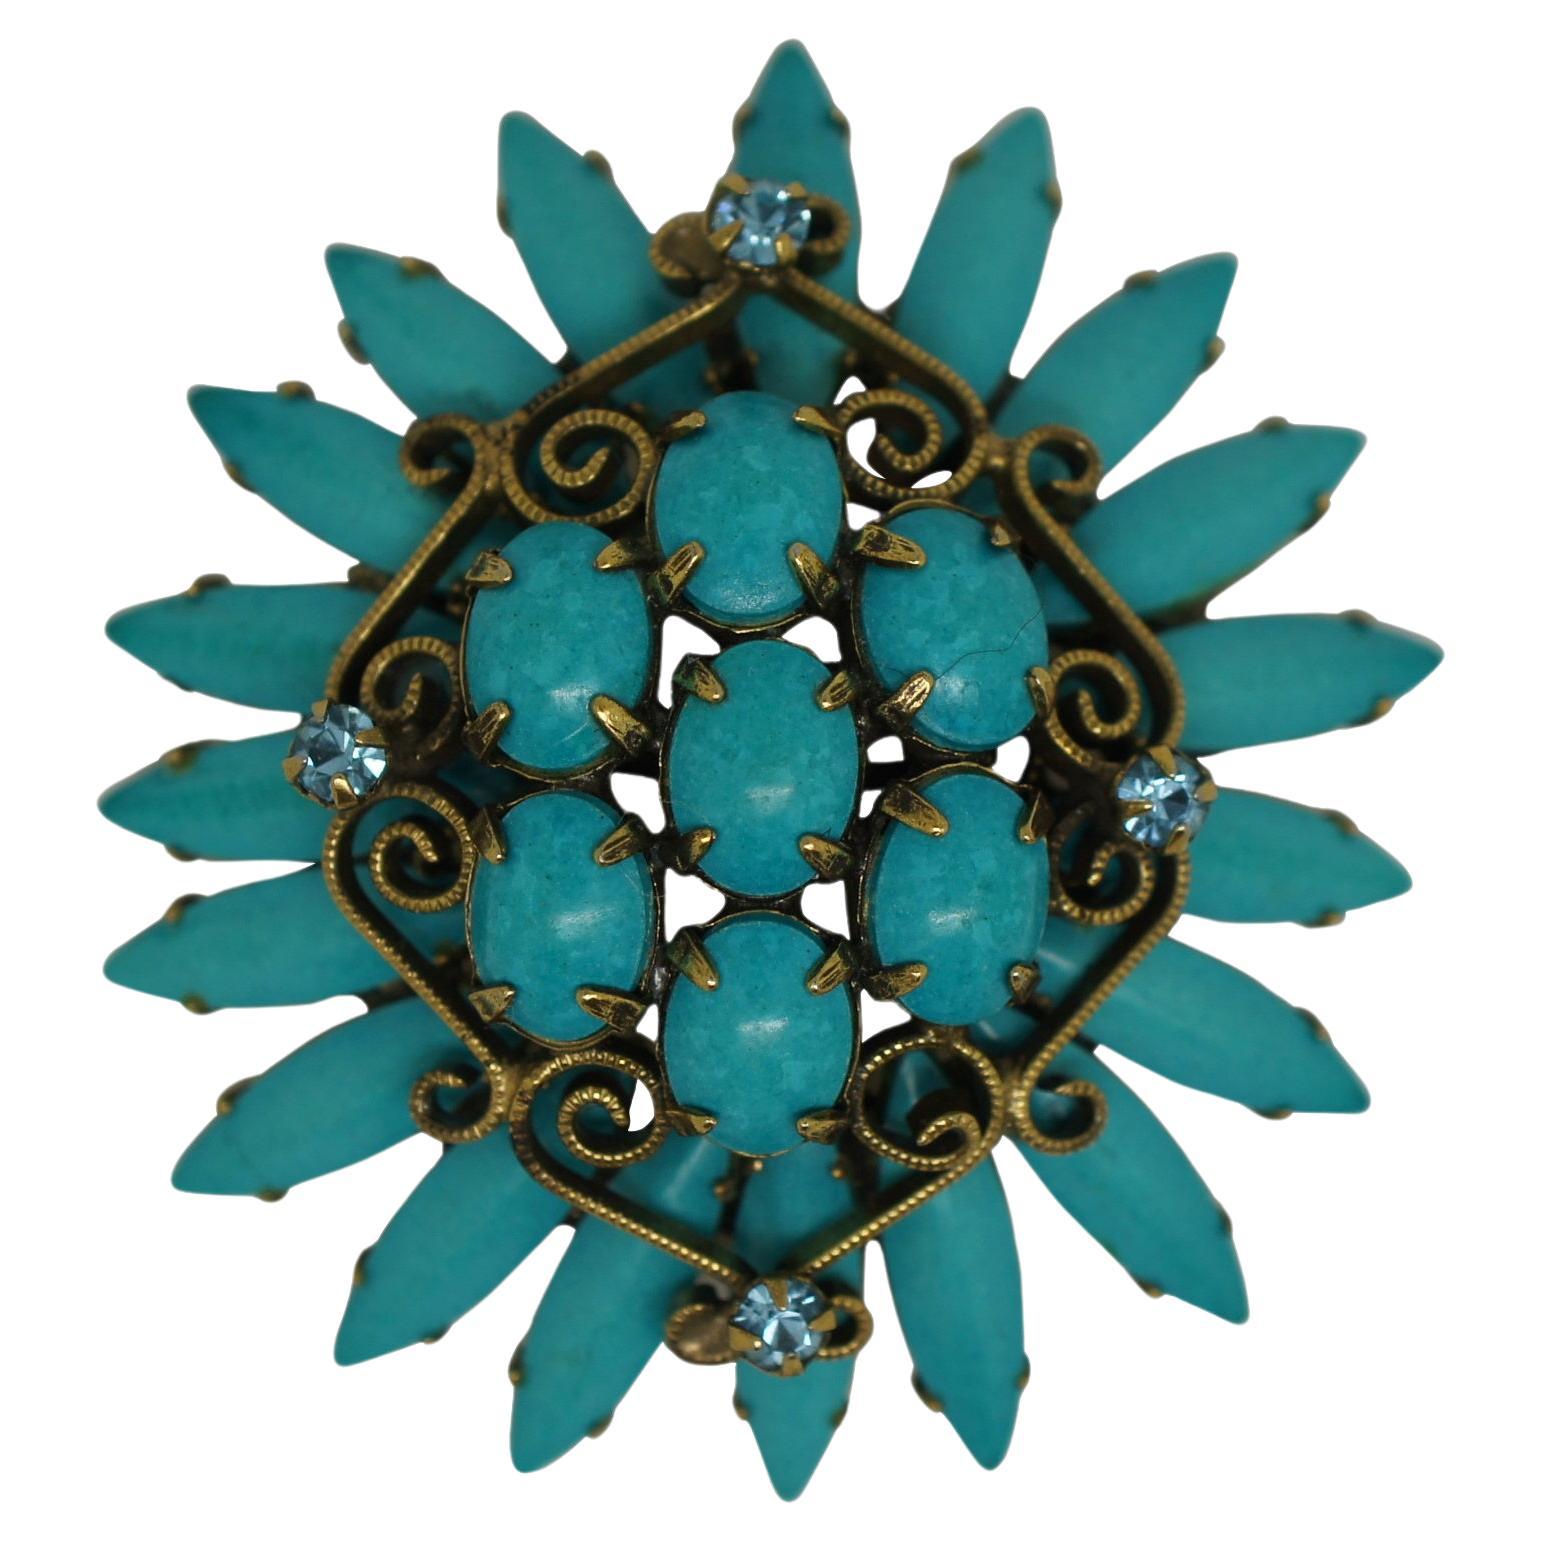 Original by Robert Southwest Turquoise Flower Pin Cluster Brooch MCM